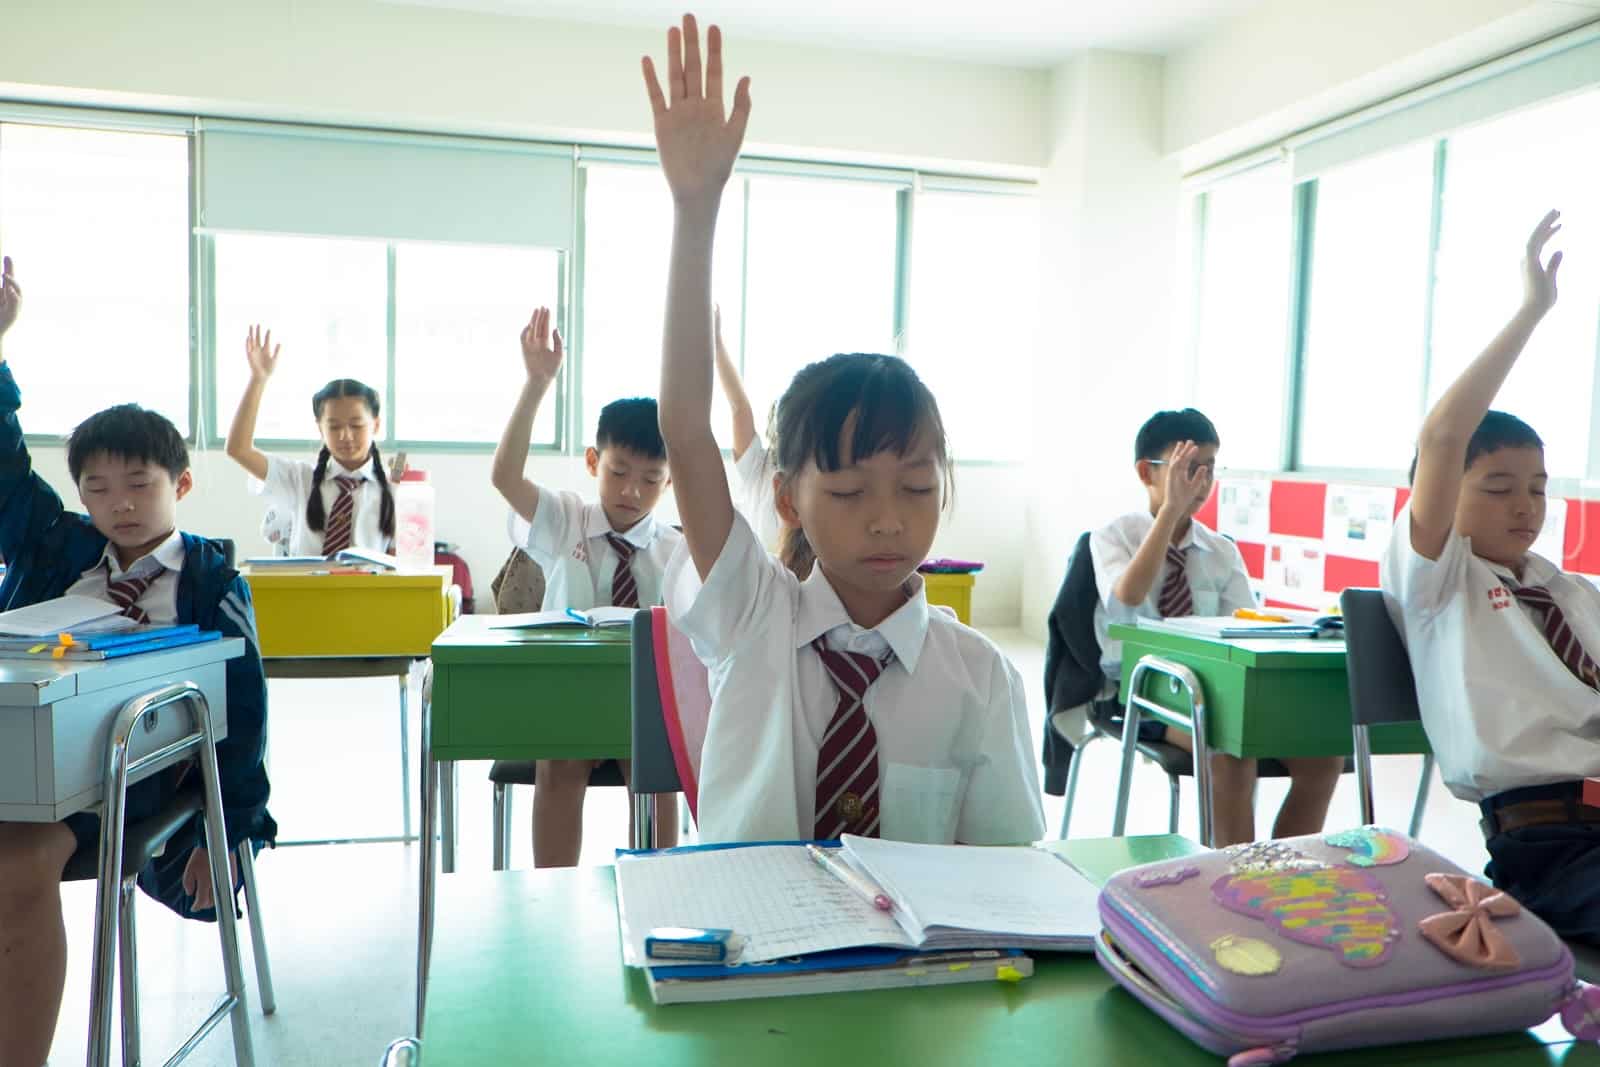 SayABC: Chinese students raise their hands in a classroom